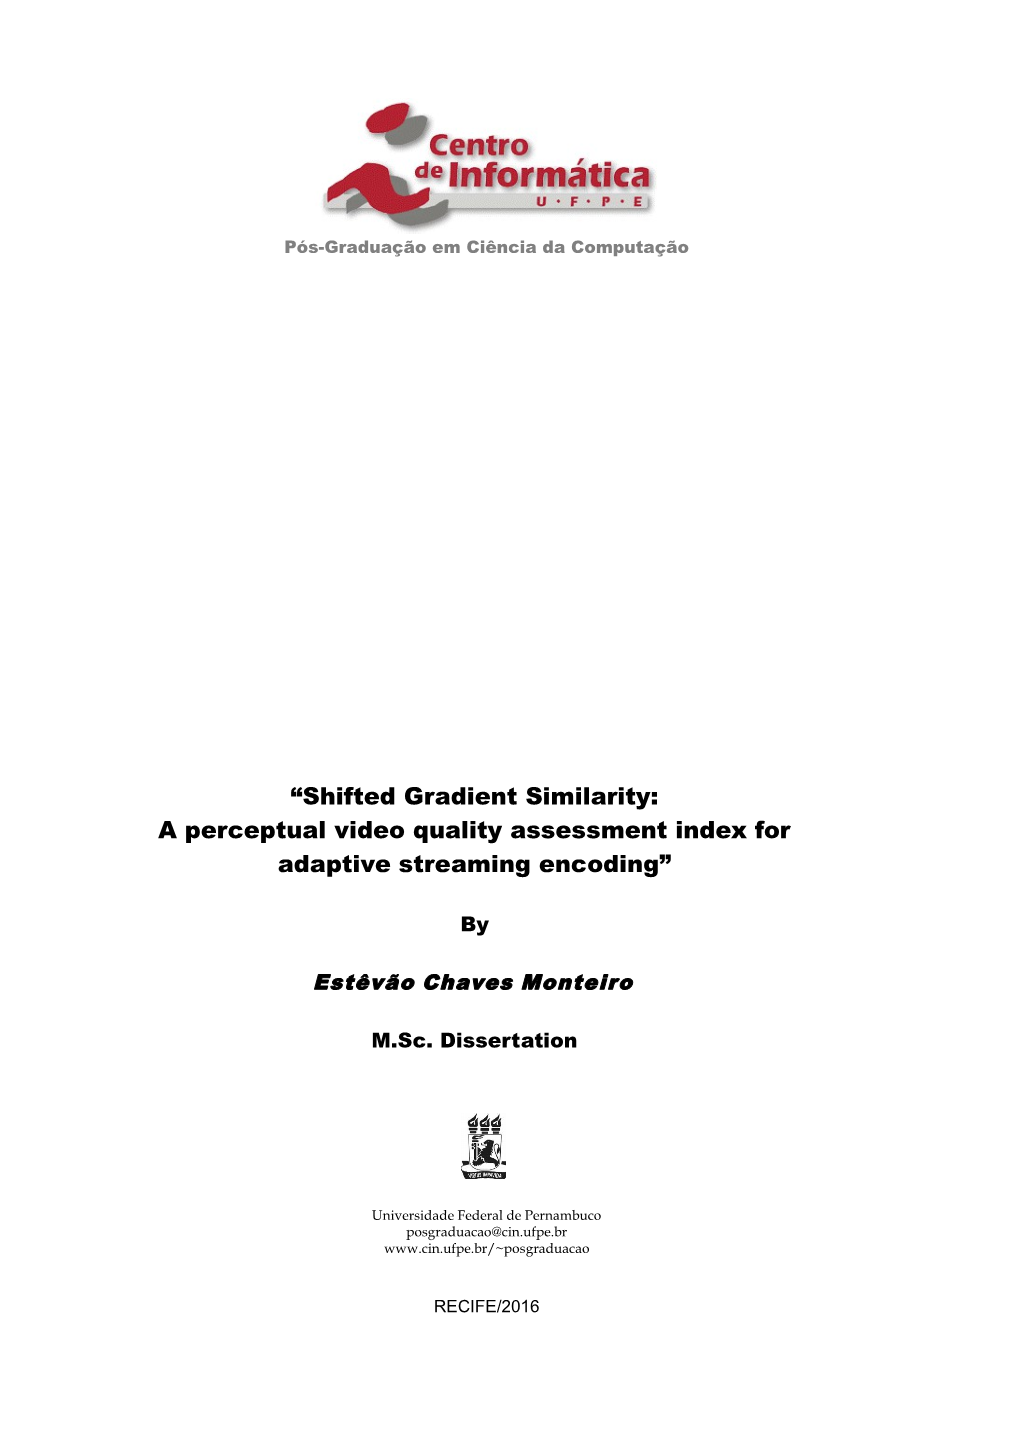 Shifted Gradient Similarity: a Perceptual Video Quality Assessment Index for Adaptive Streaming Encoding”